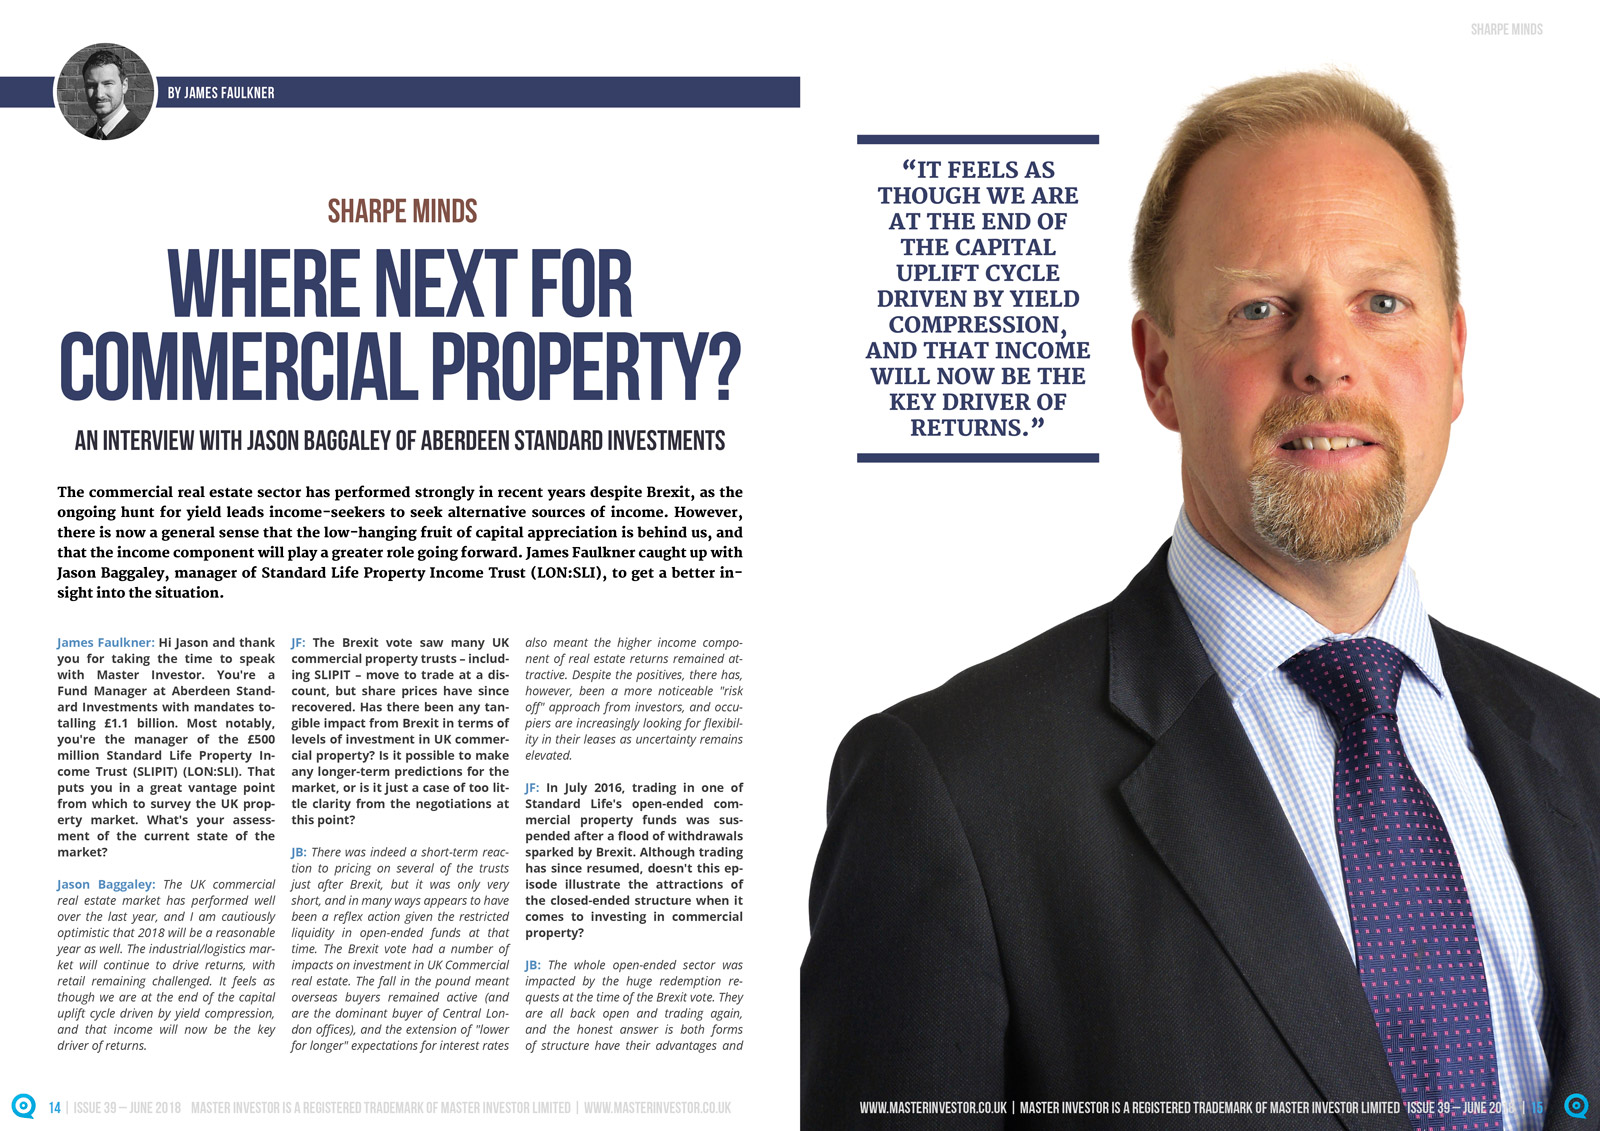 Where next for commercial property?